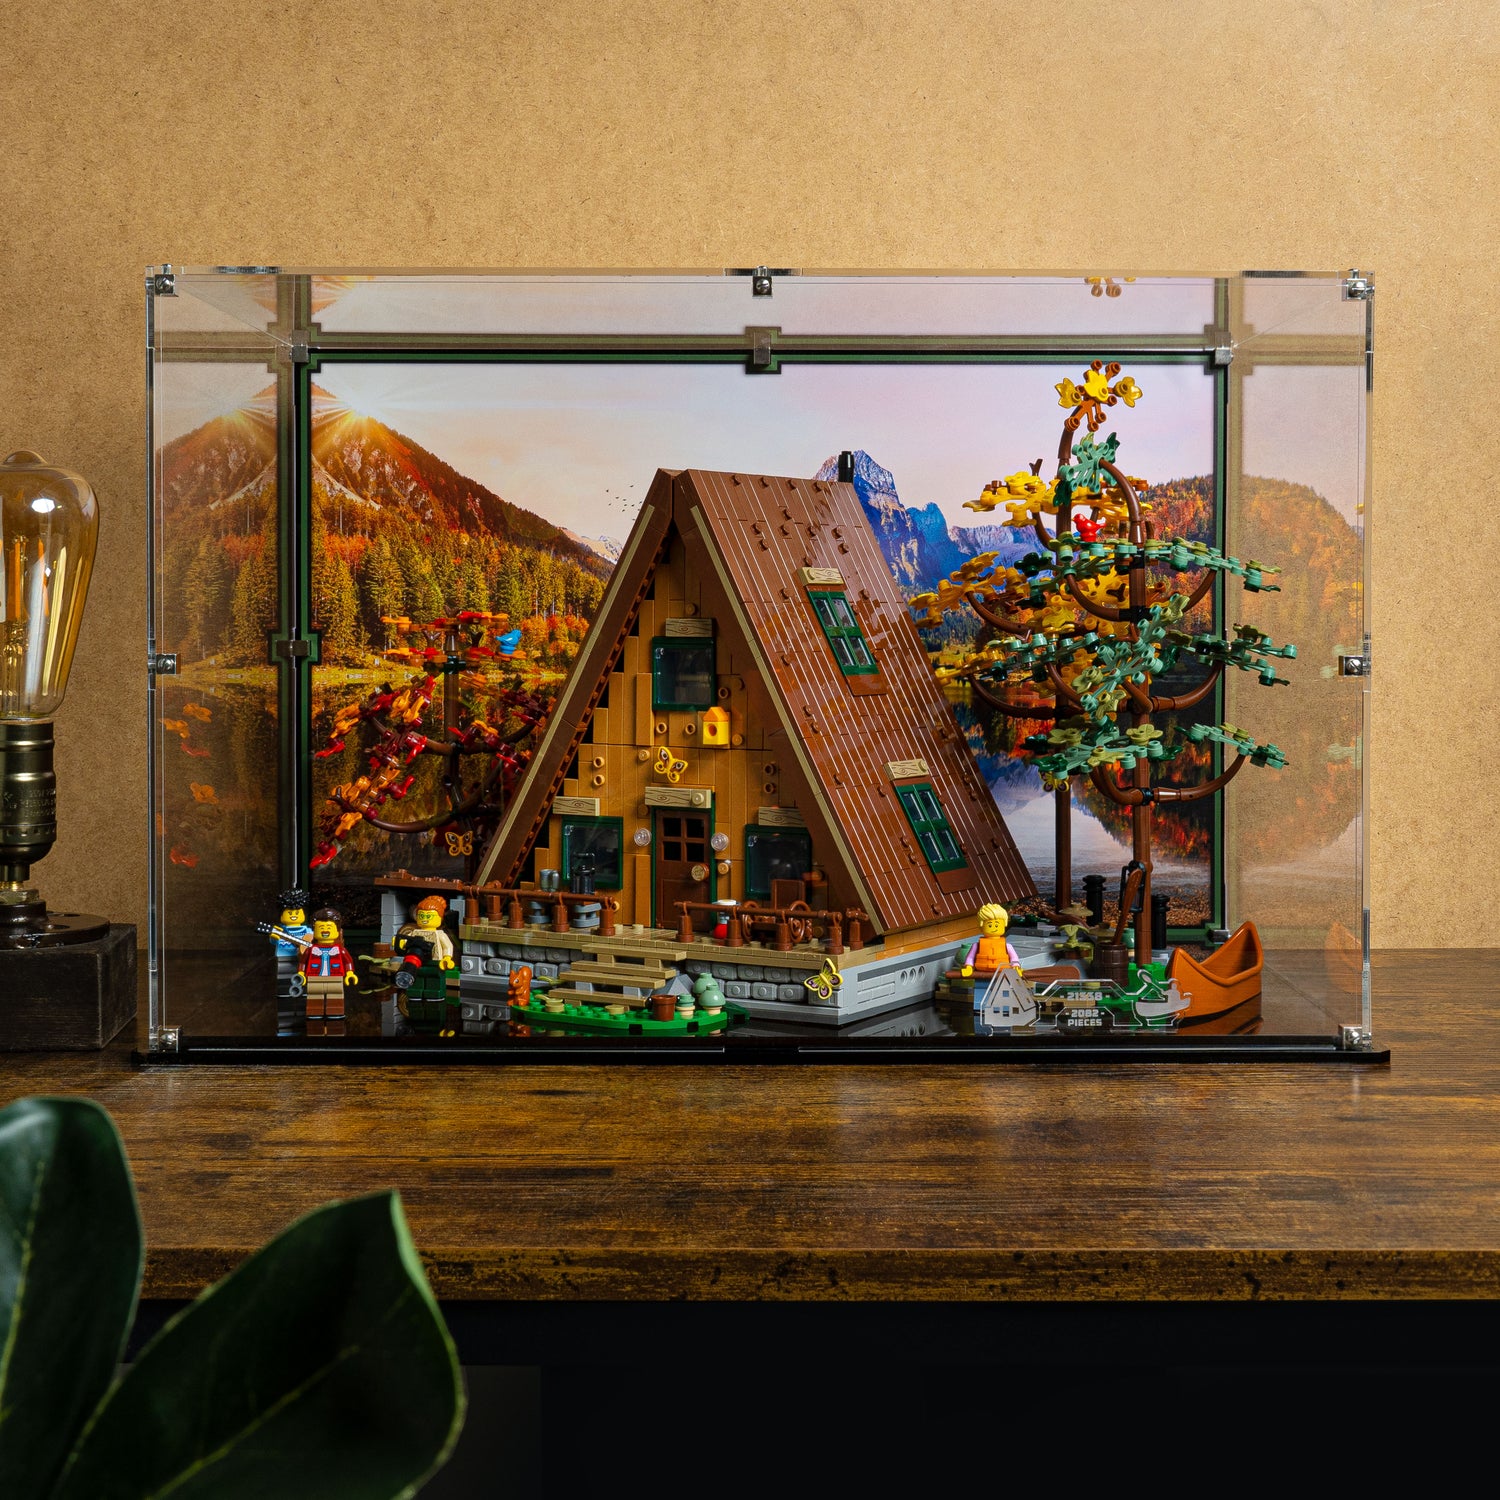 Acrylic Display Case for LEGO The Globe